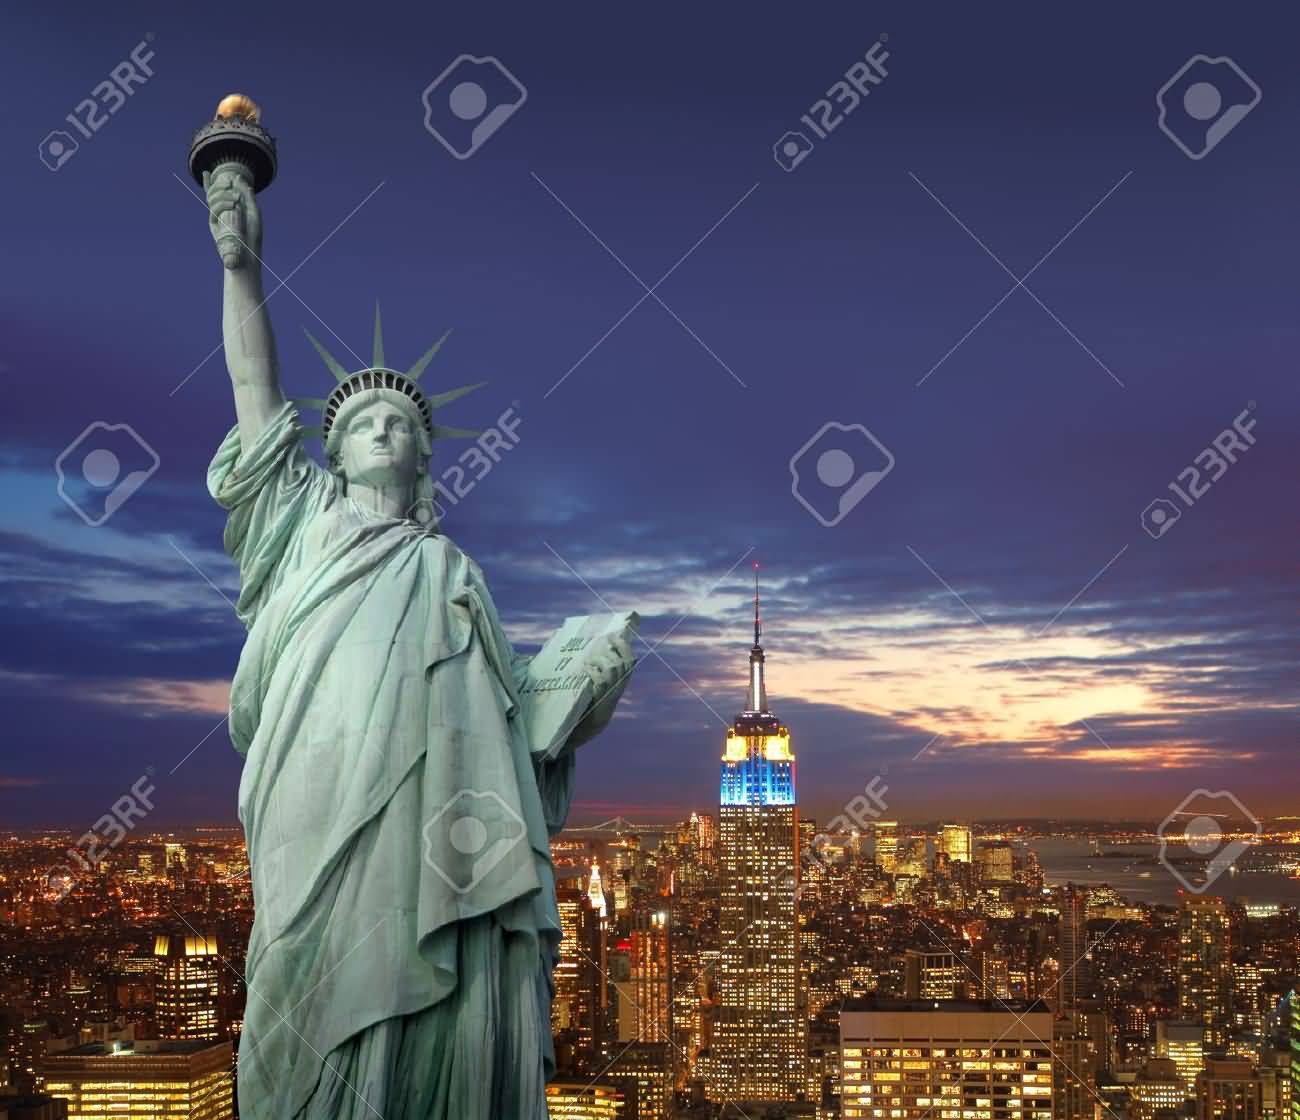 Statue Of Liberty With Night View Of New York City In The Background